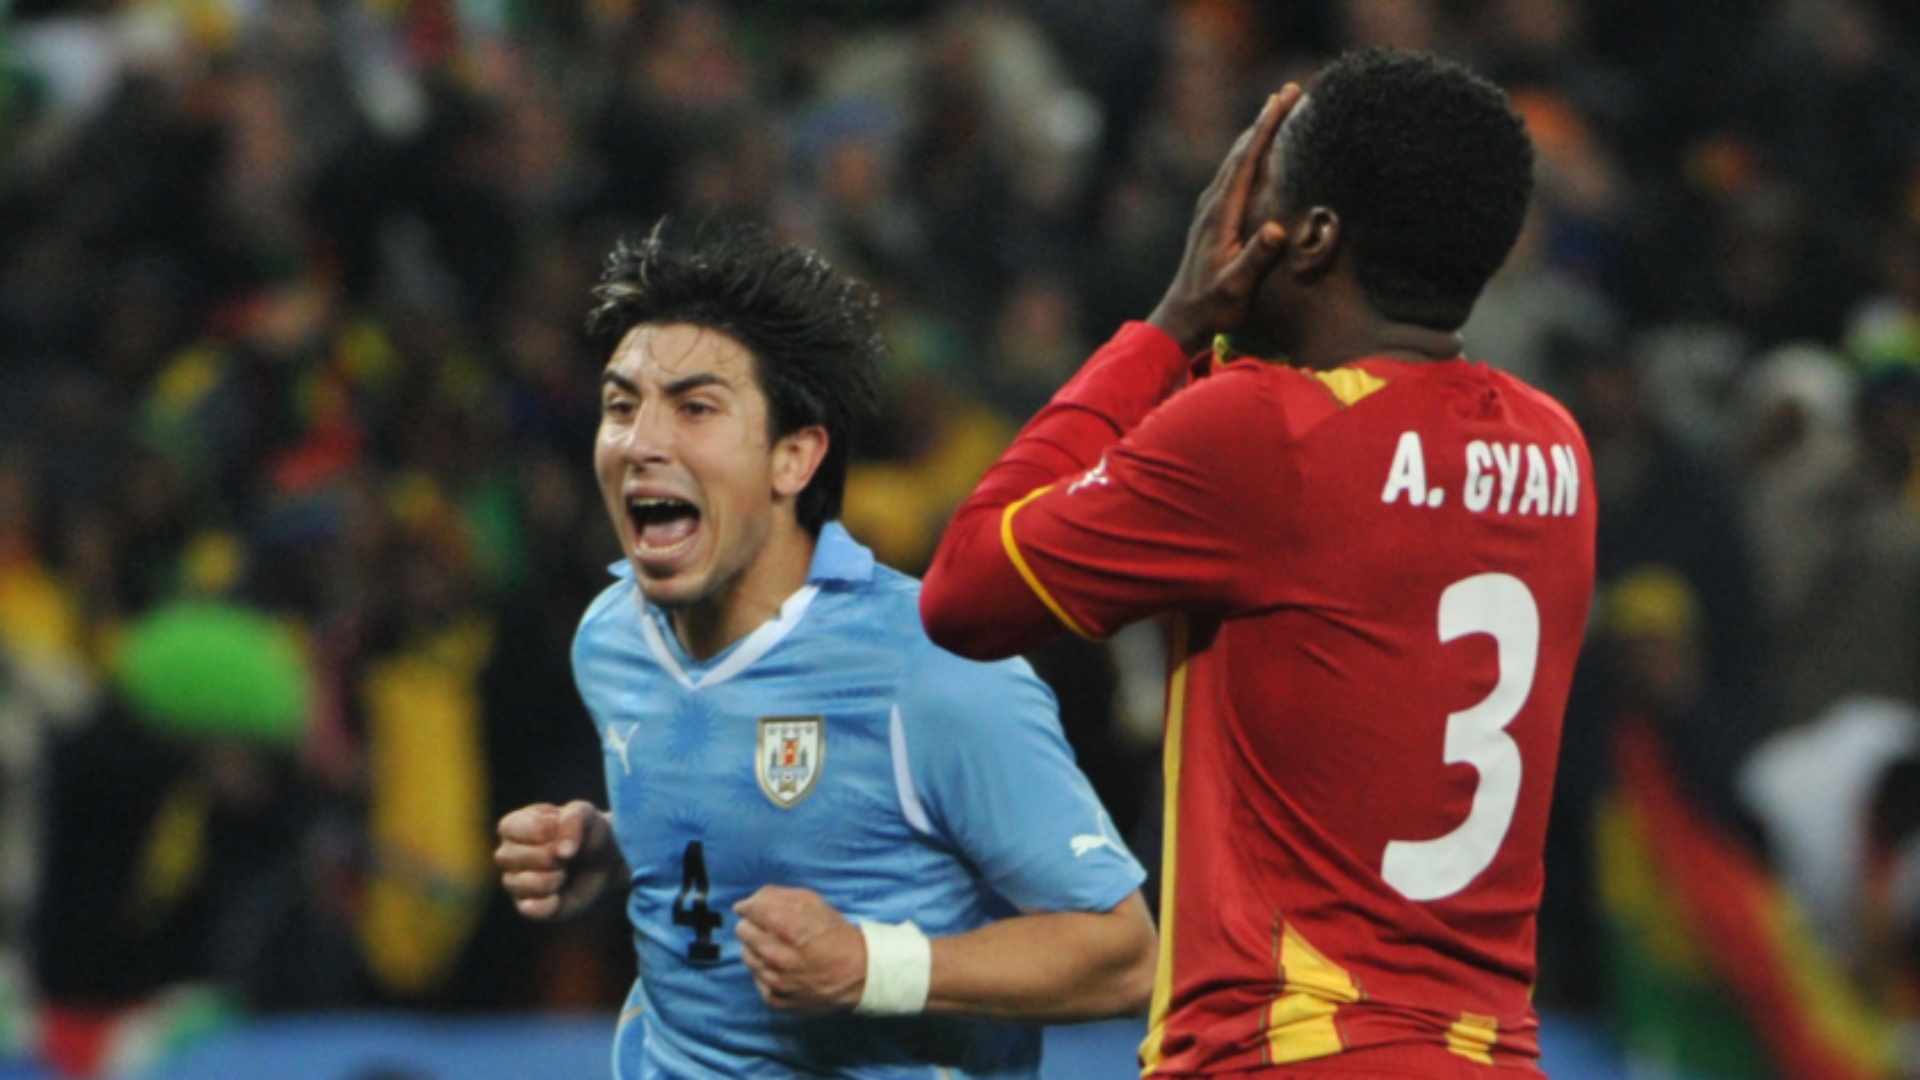 'Uruguay penalty miss will haunt me for the rest of my life' - Ghana legend Gyan